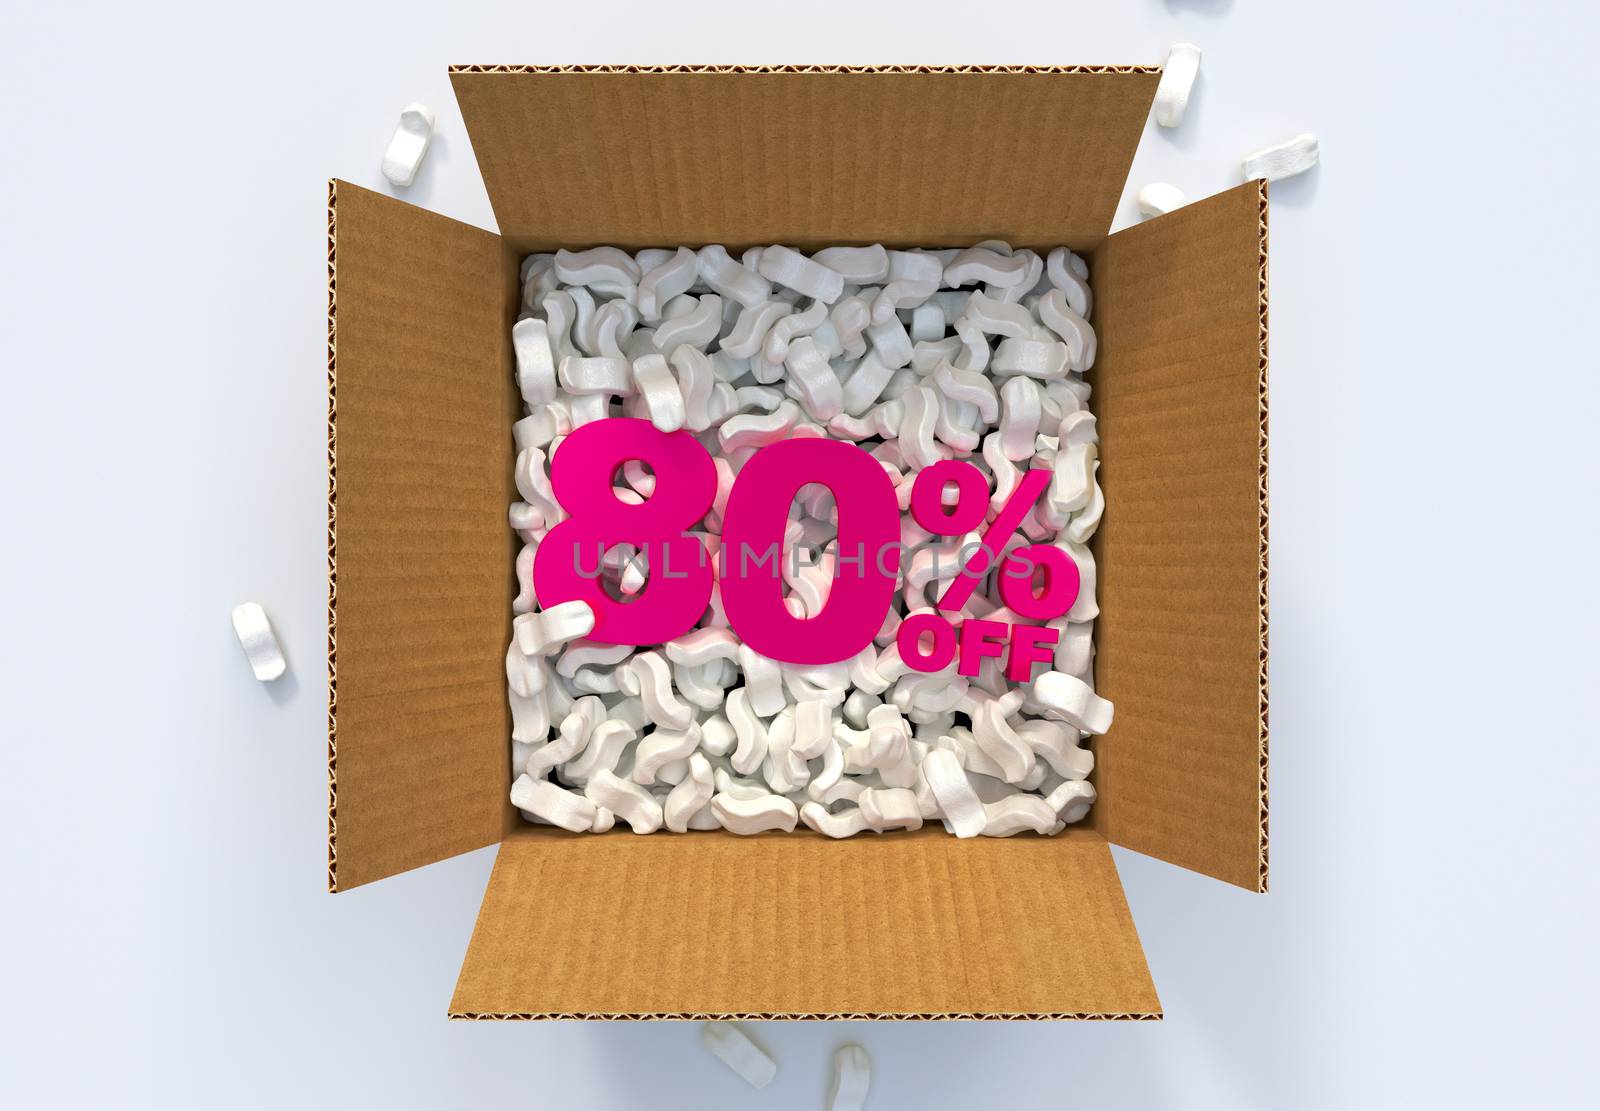 Box with shipping peanuts and 80 percent off sign by Barbraford